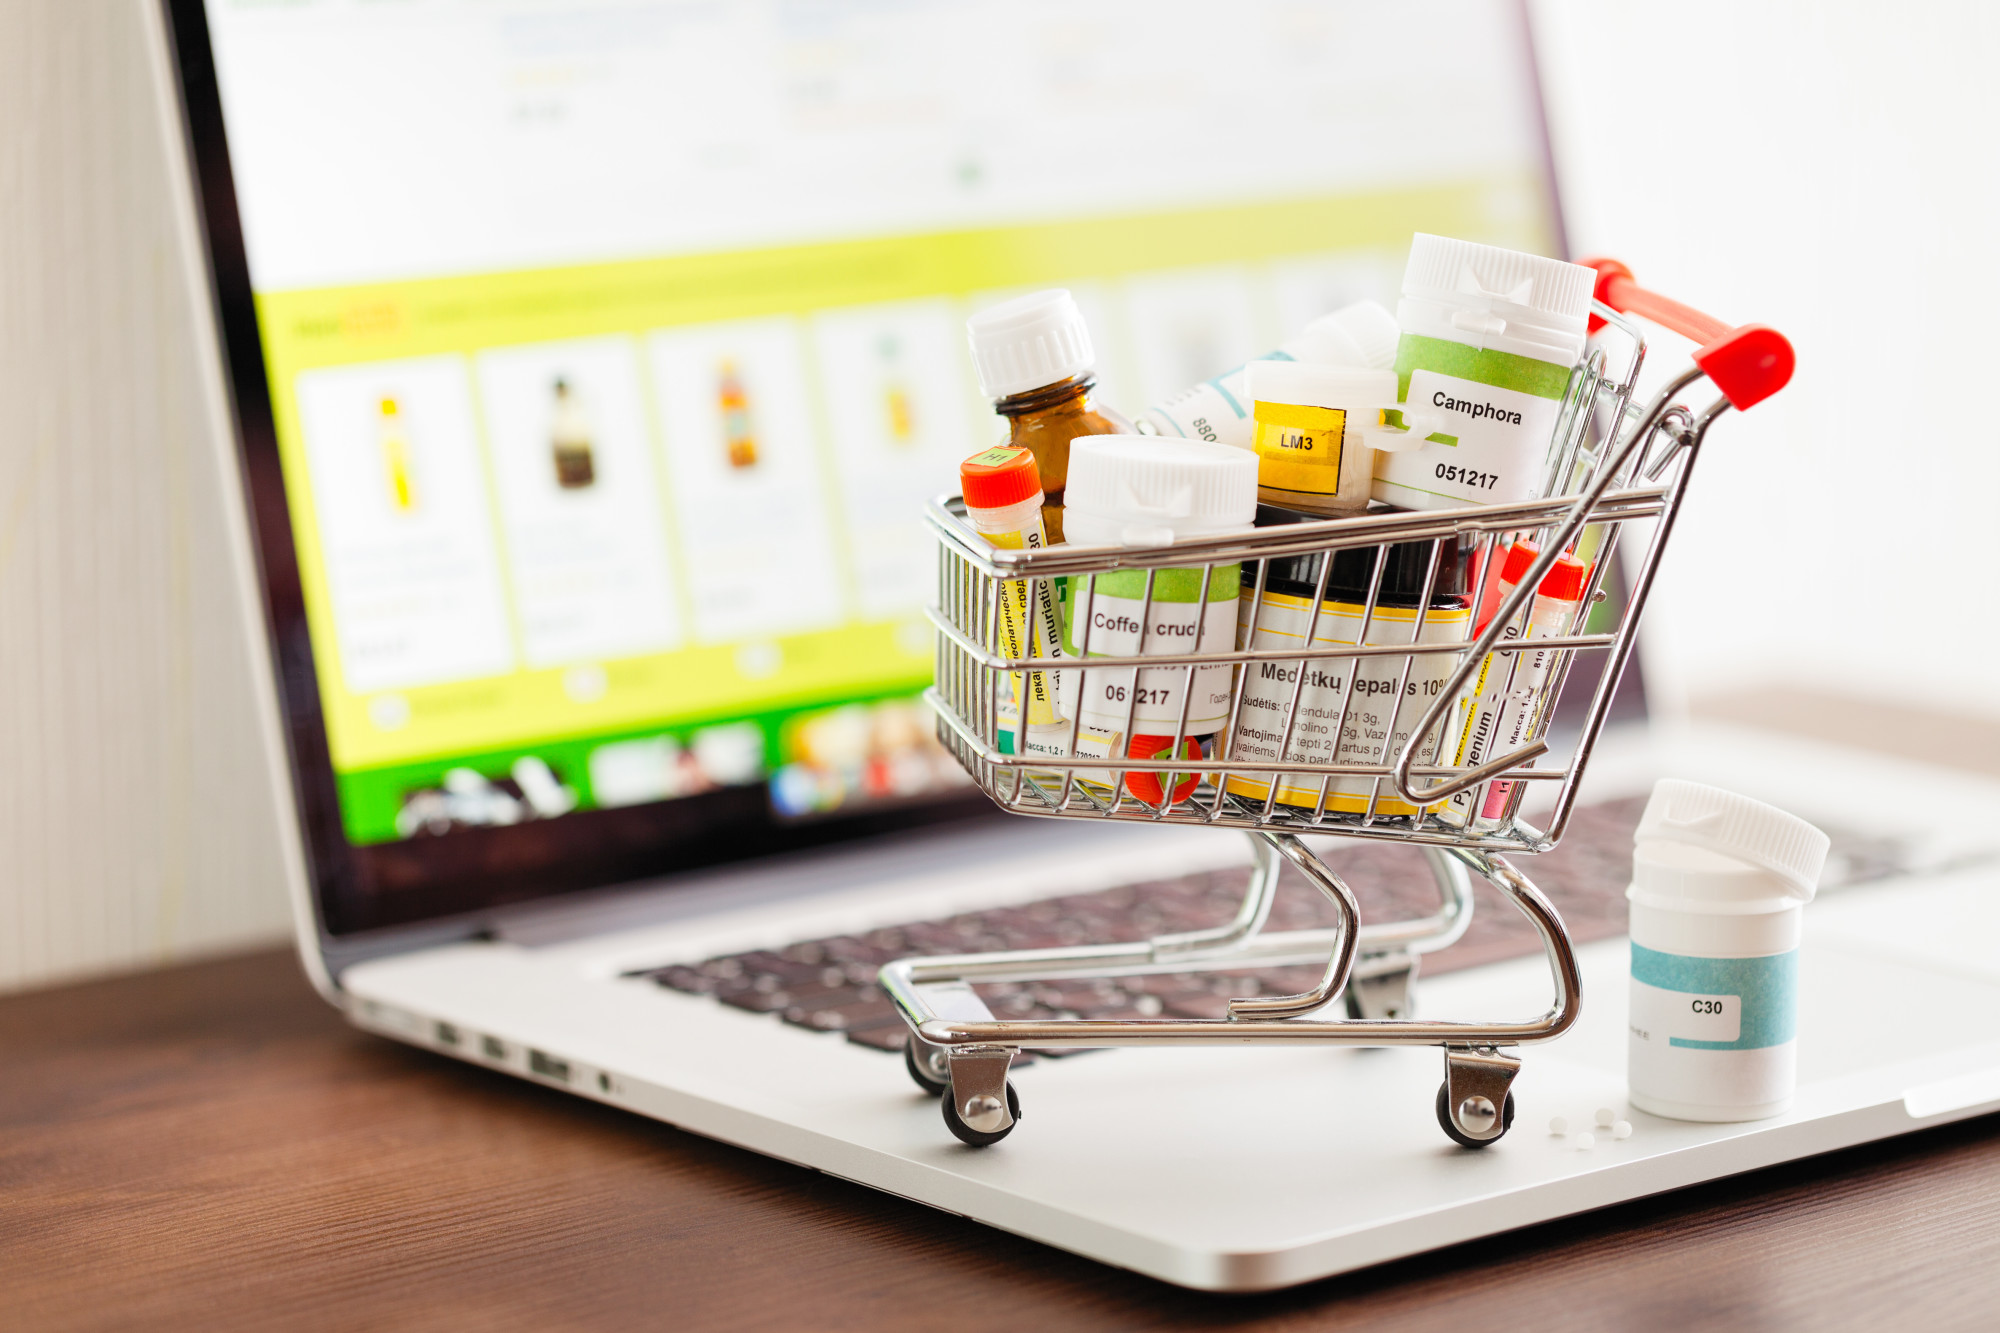 Online stores can provide the right medicine for your needs if you know your sources. Here is everything to know about how to buy medicine safely online.